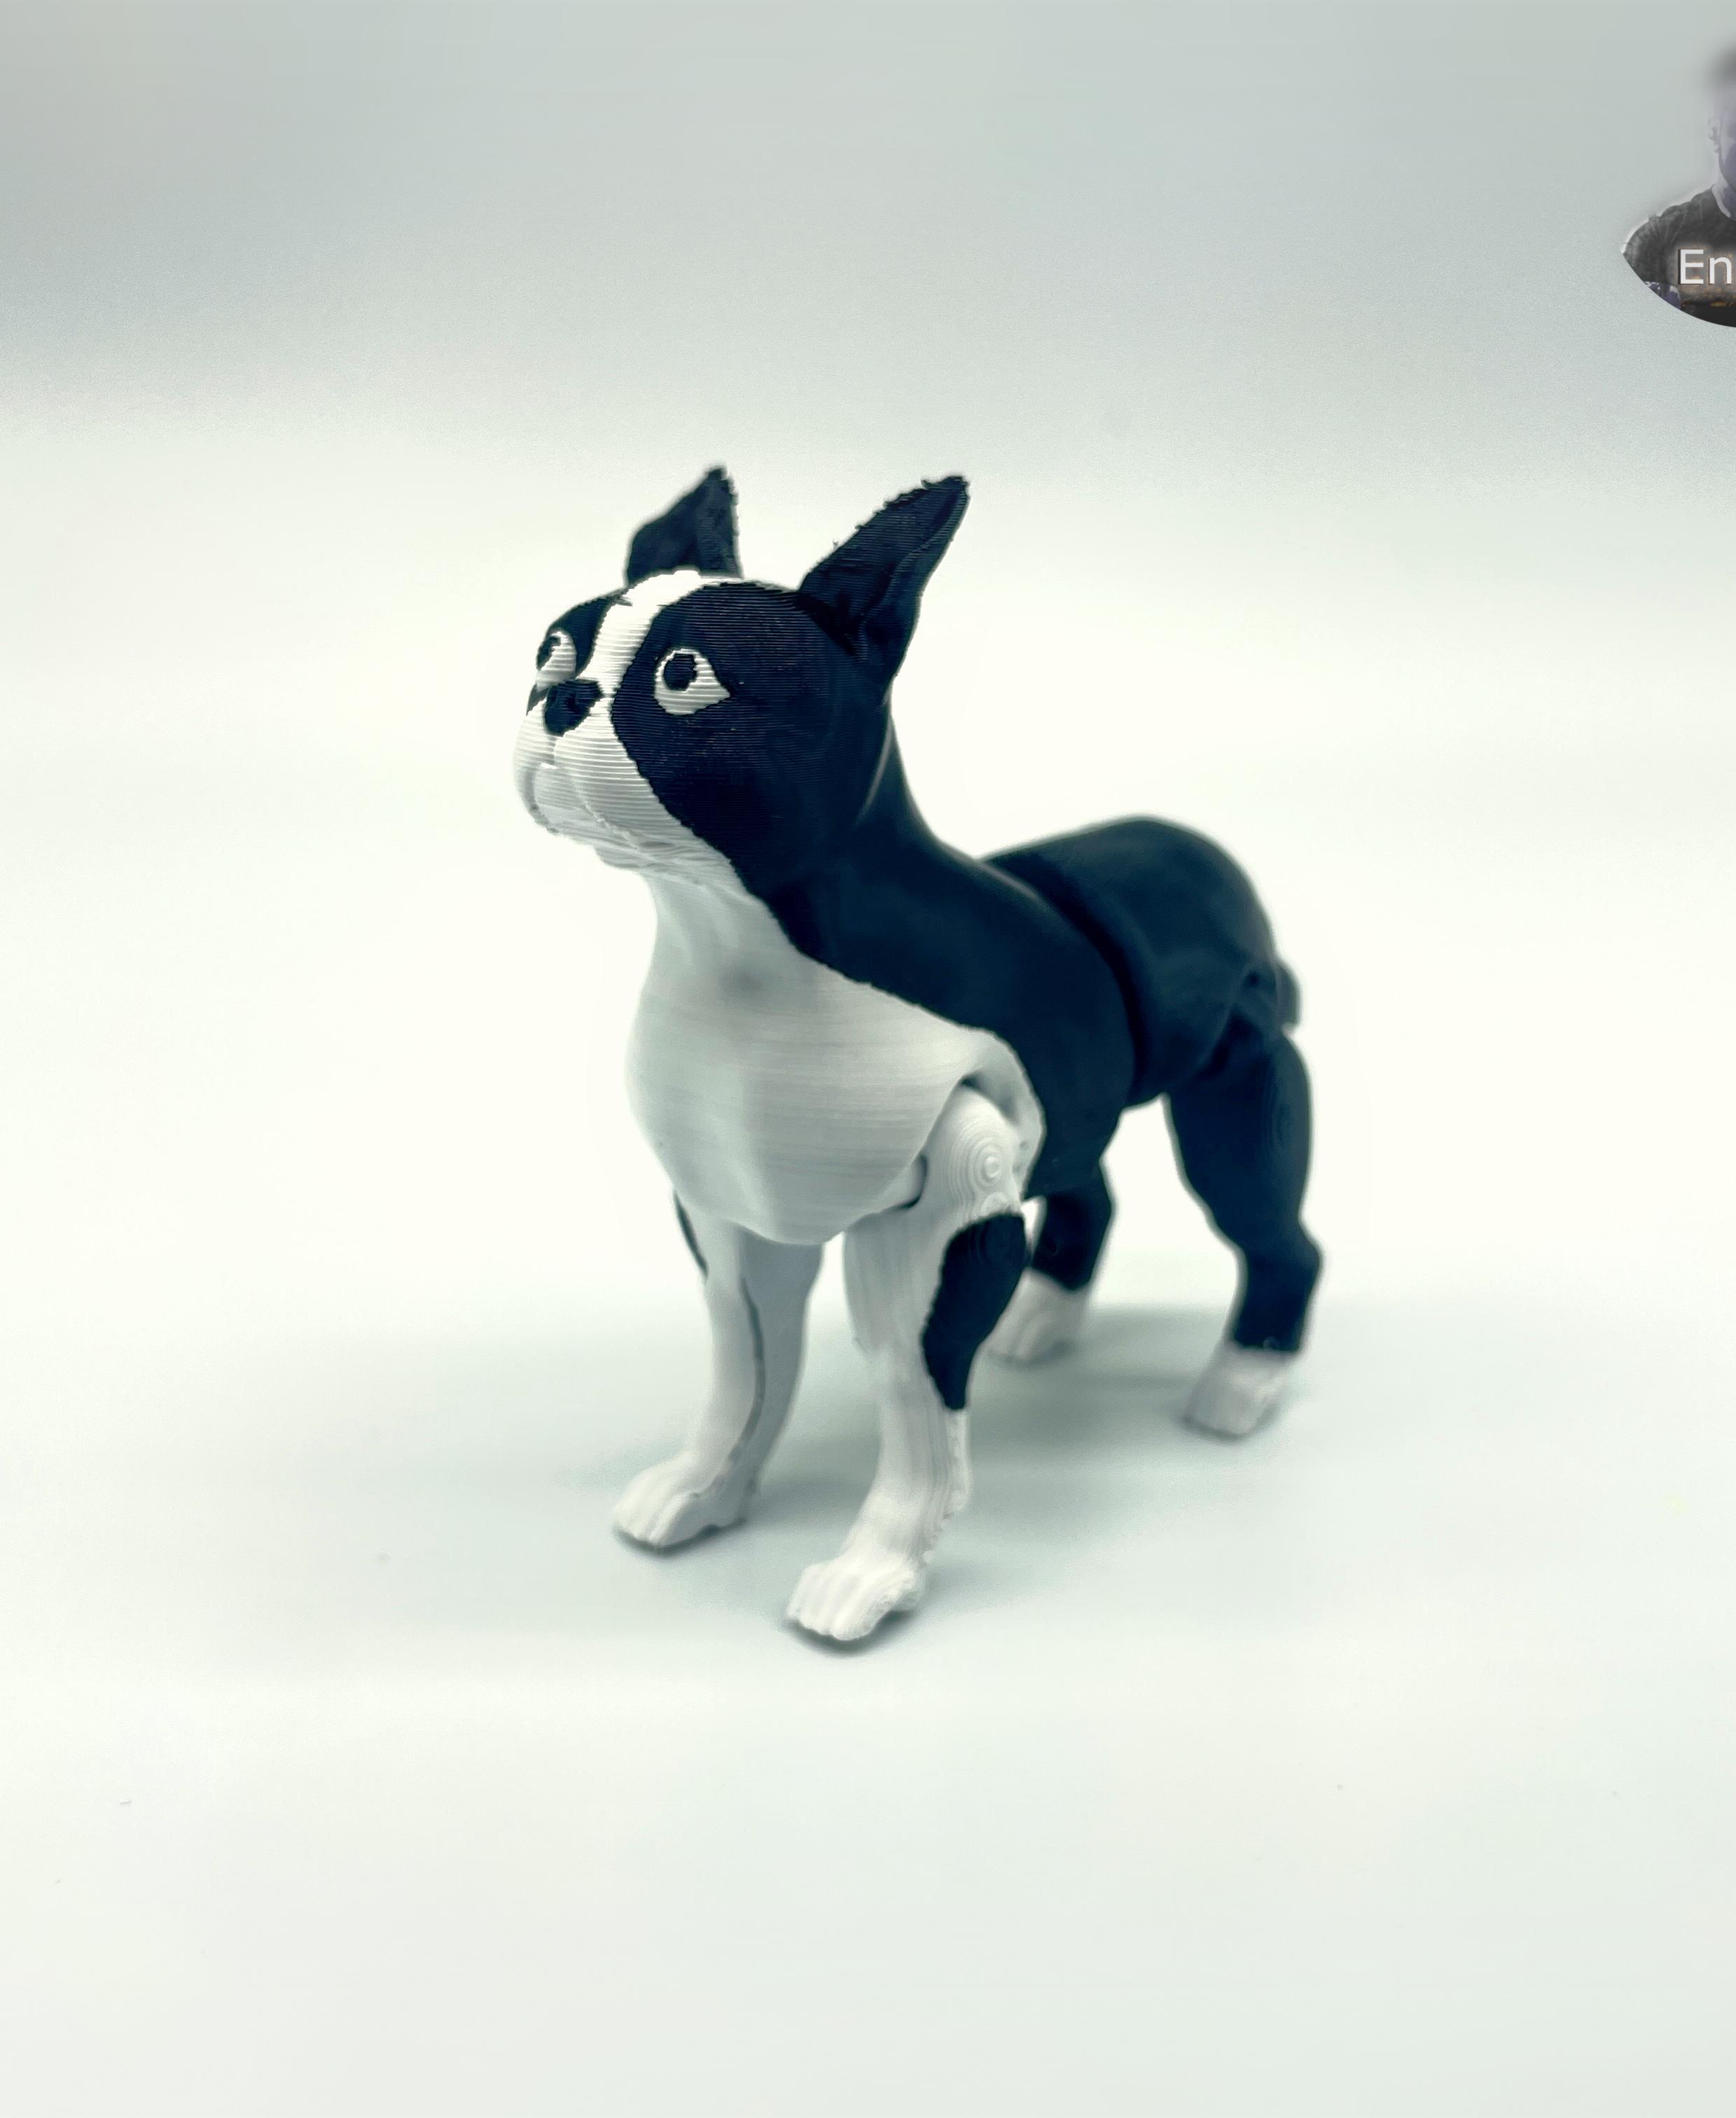 Boston Terrier Dog - Articulated - Print in Place - Flexi - No supports 3d model